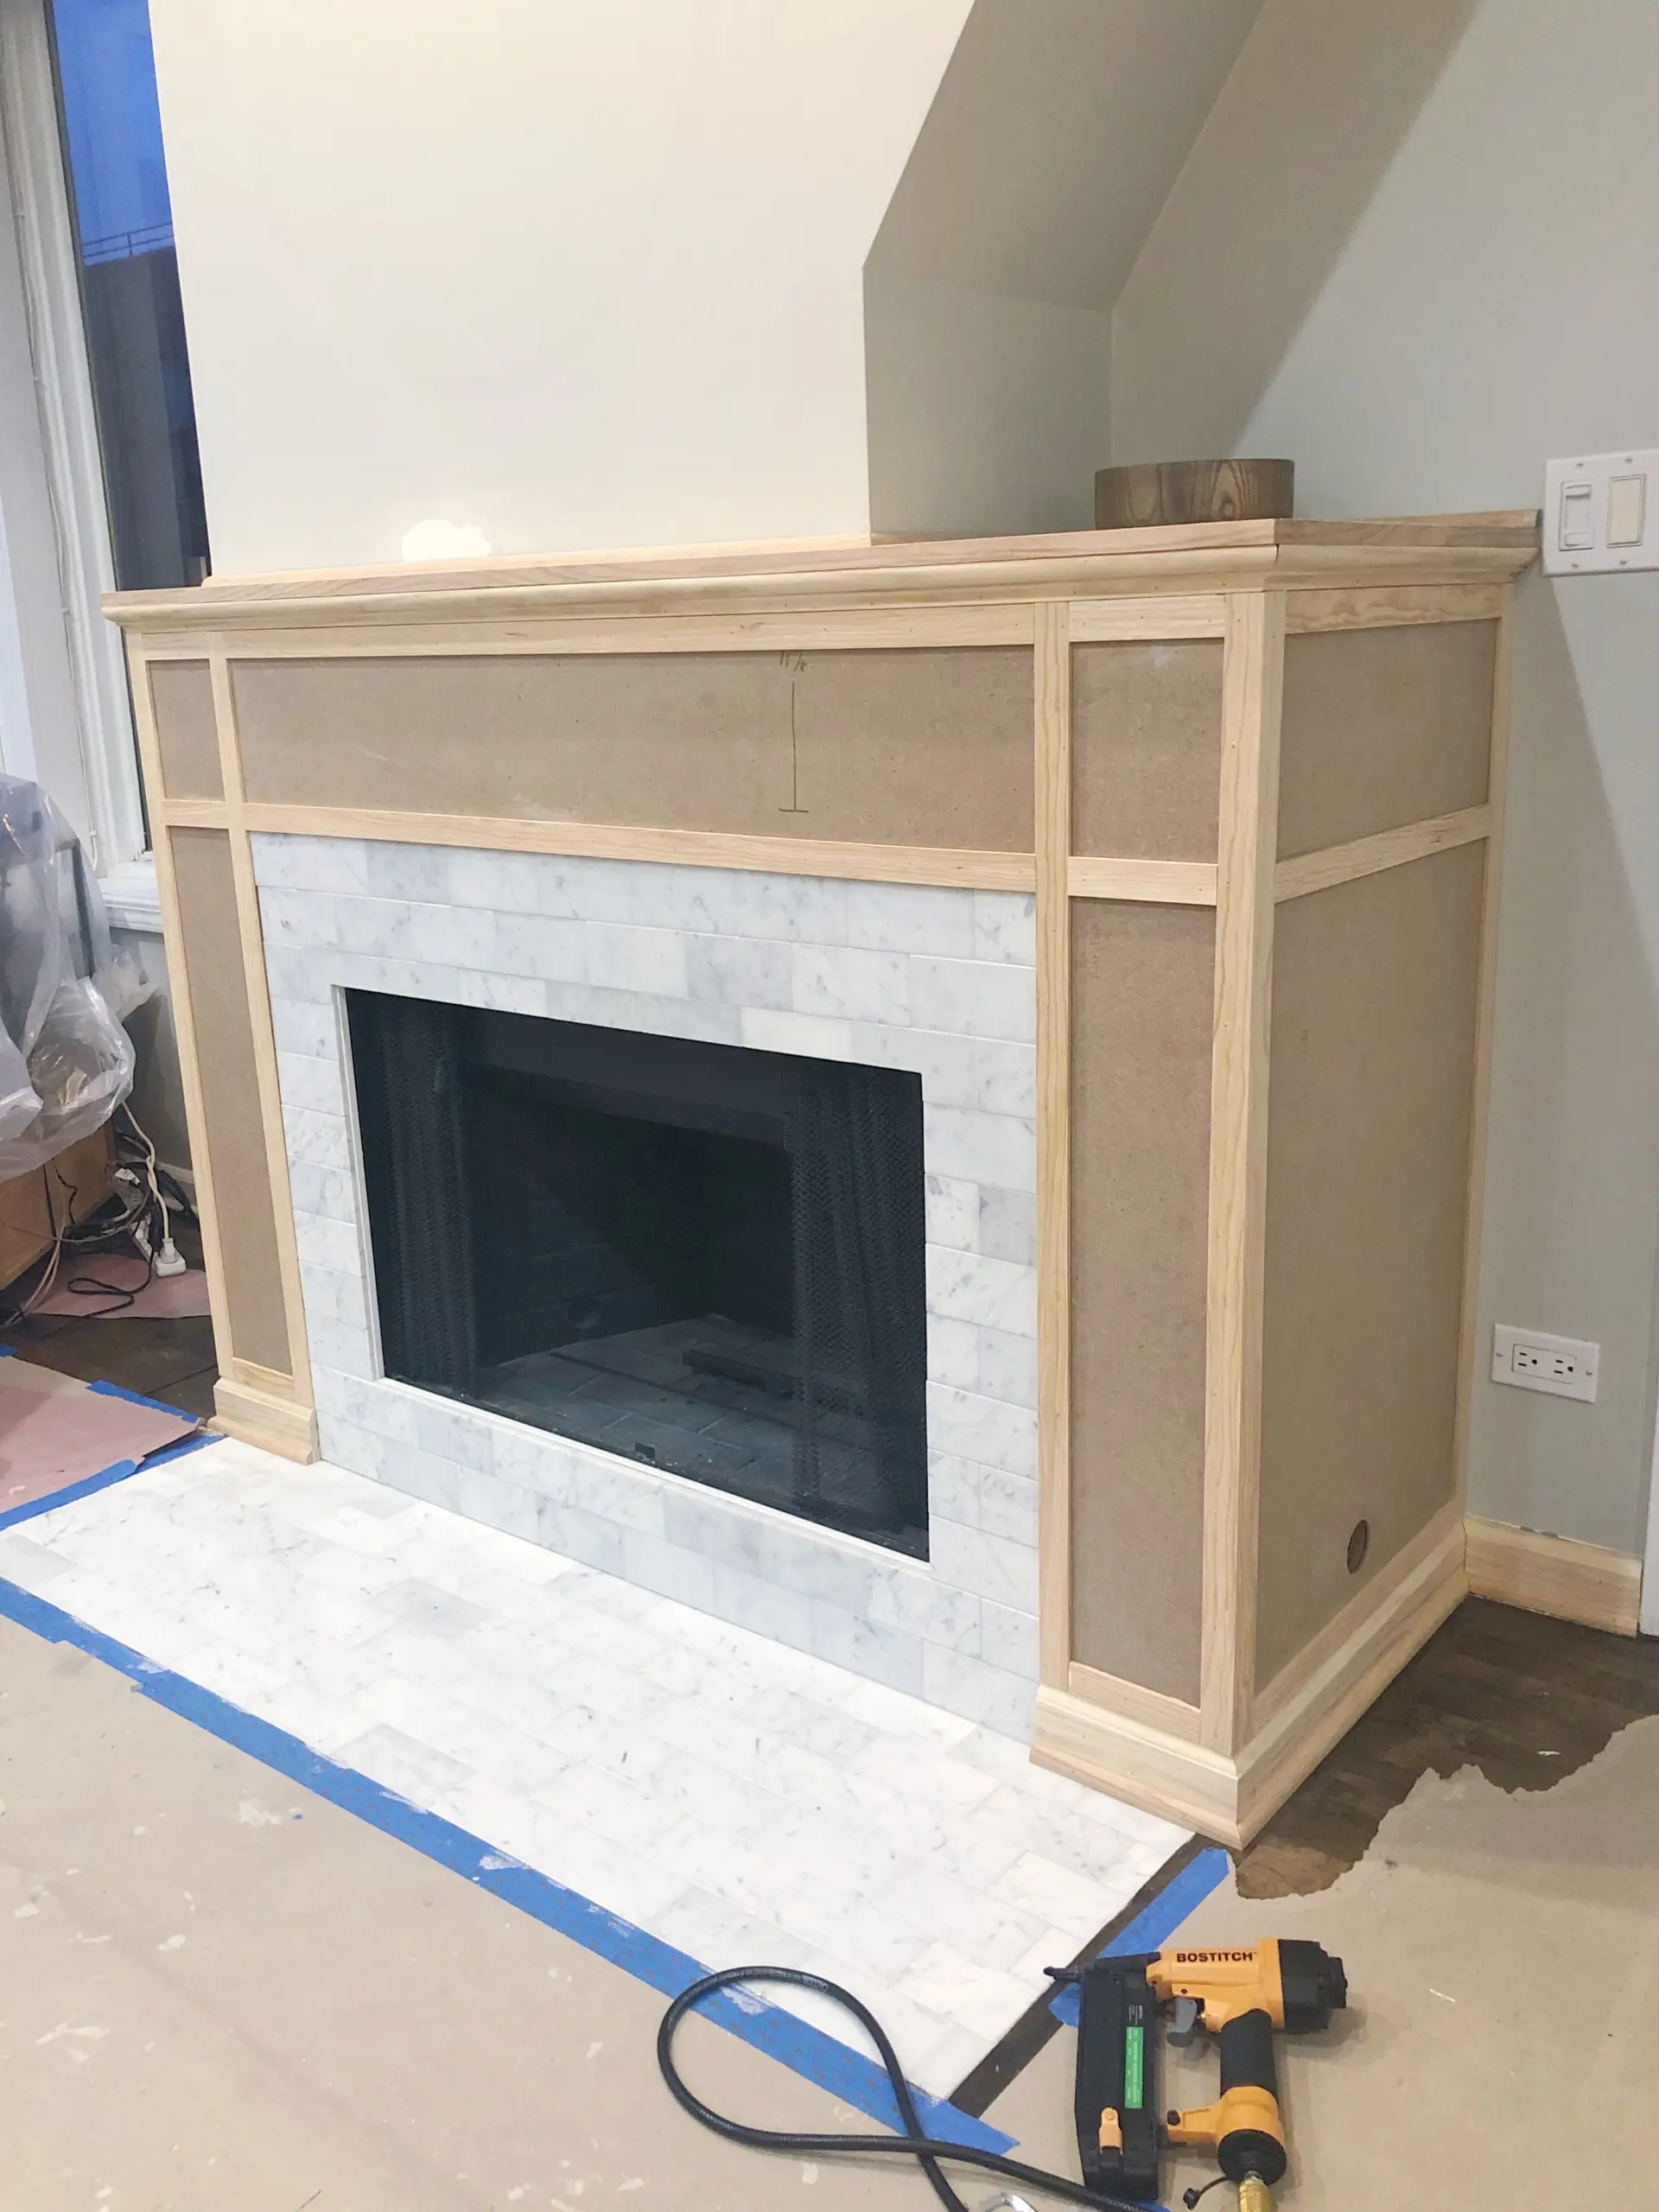 Building a DIY fireplace mantle